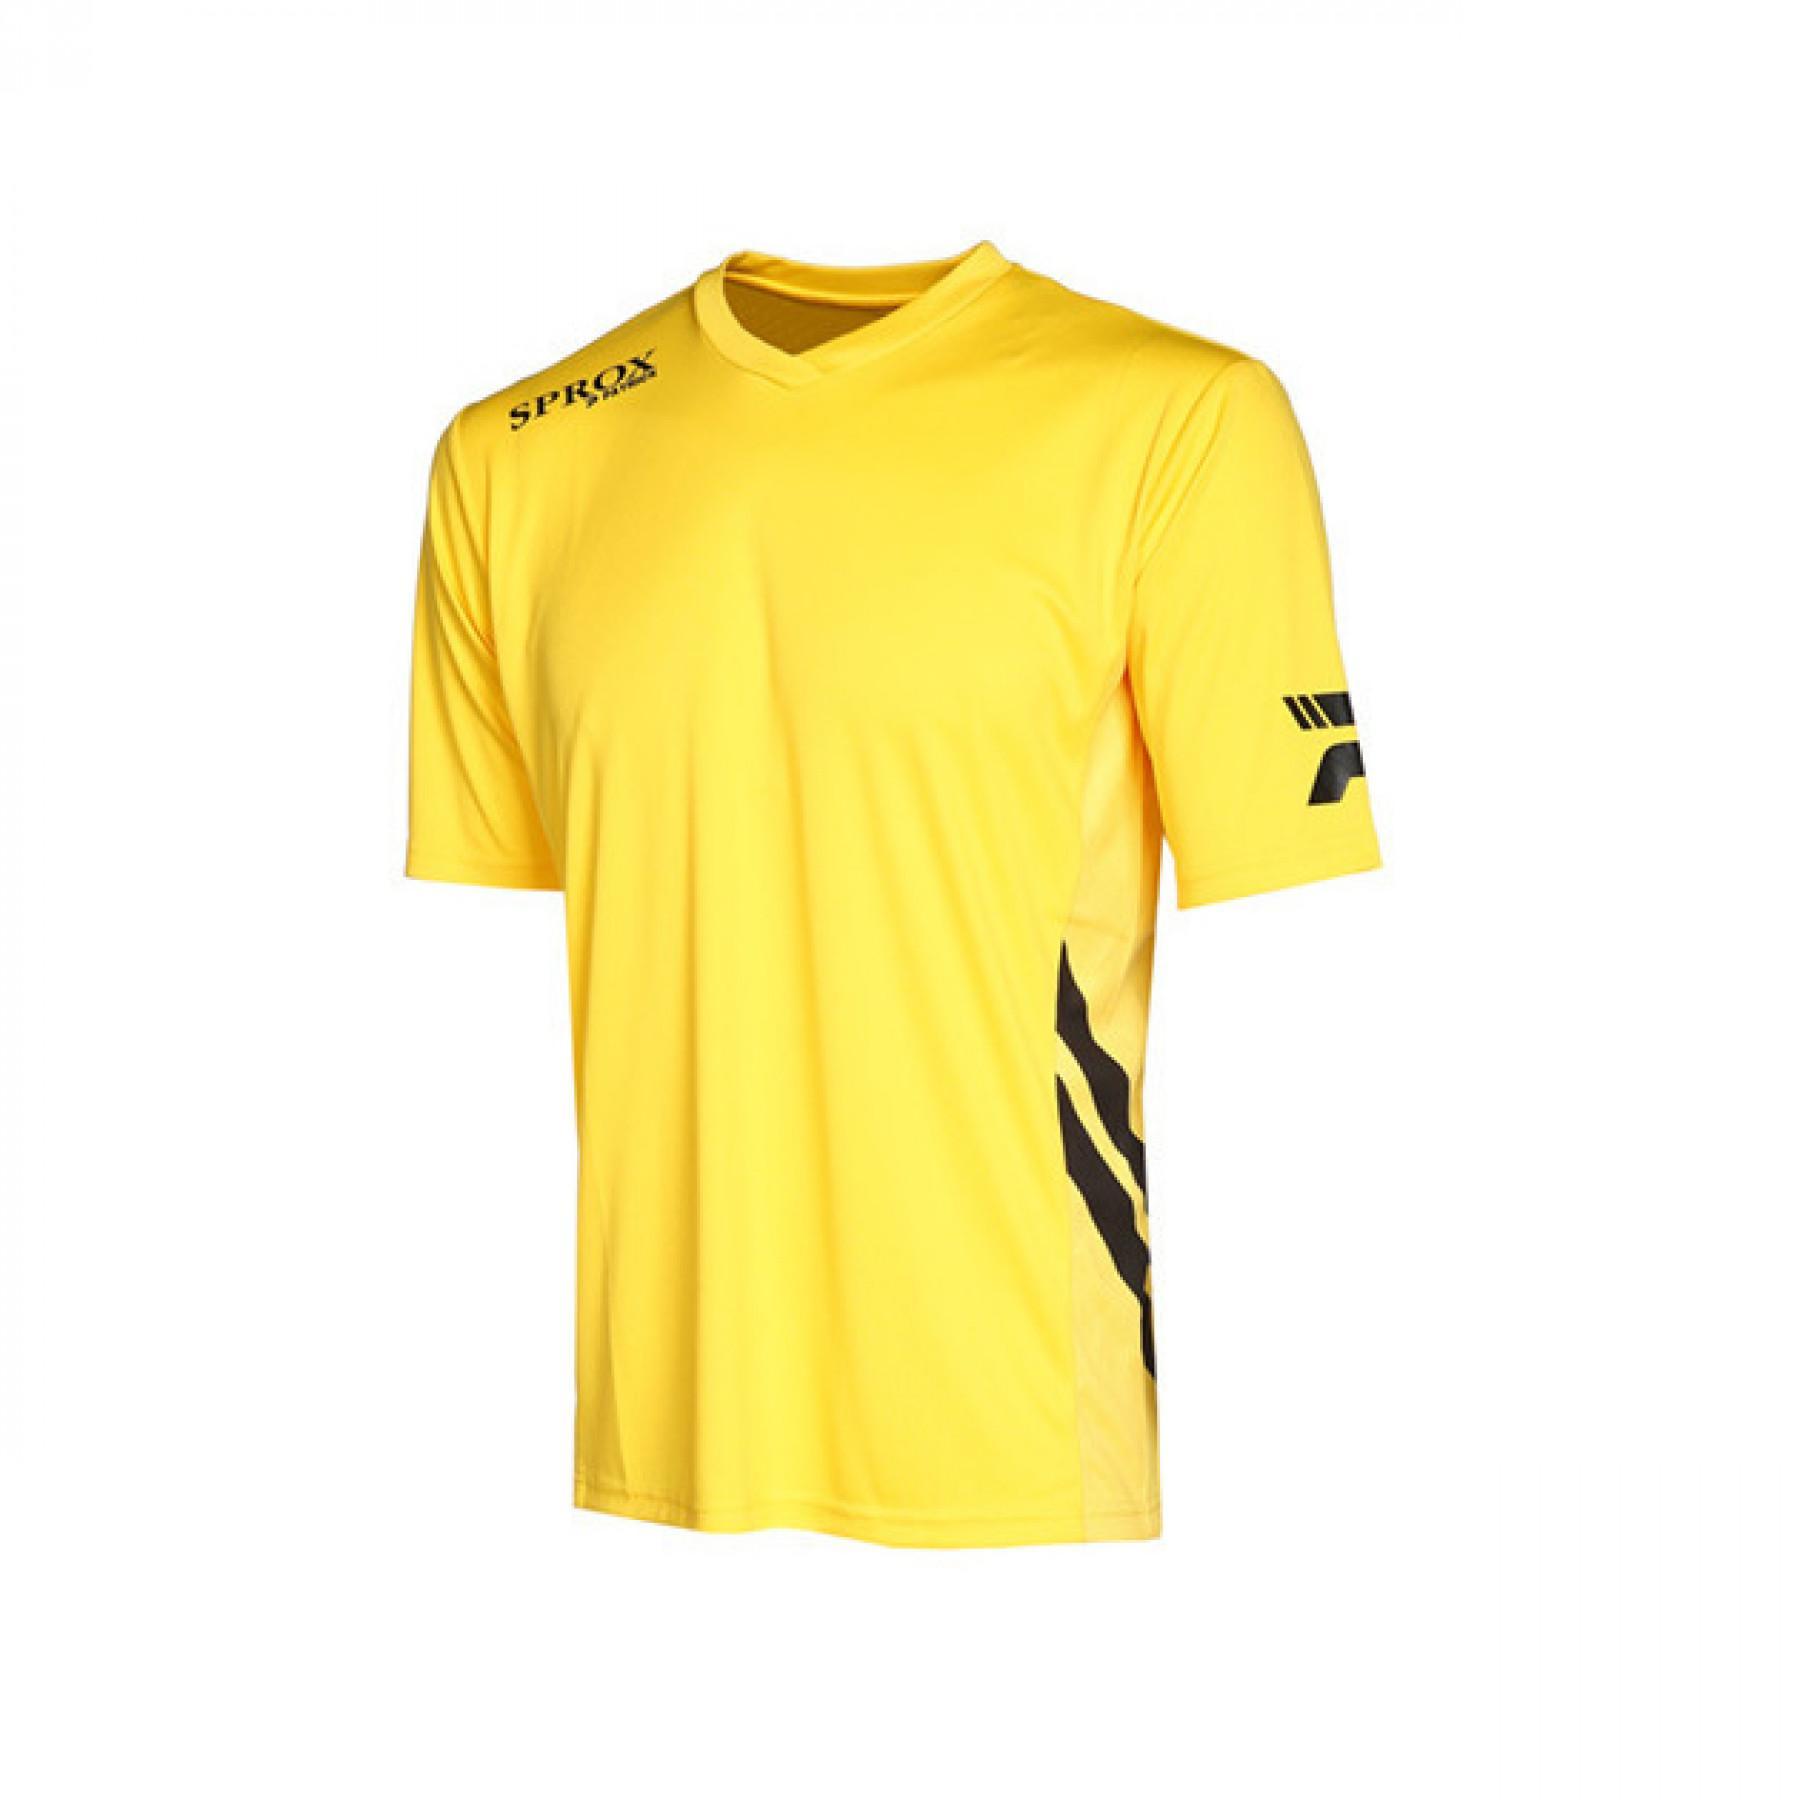 Maillot Patrick Sprox